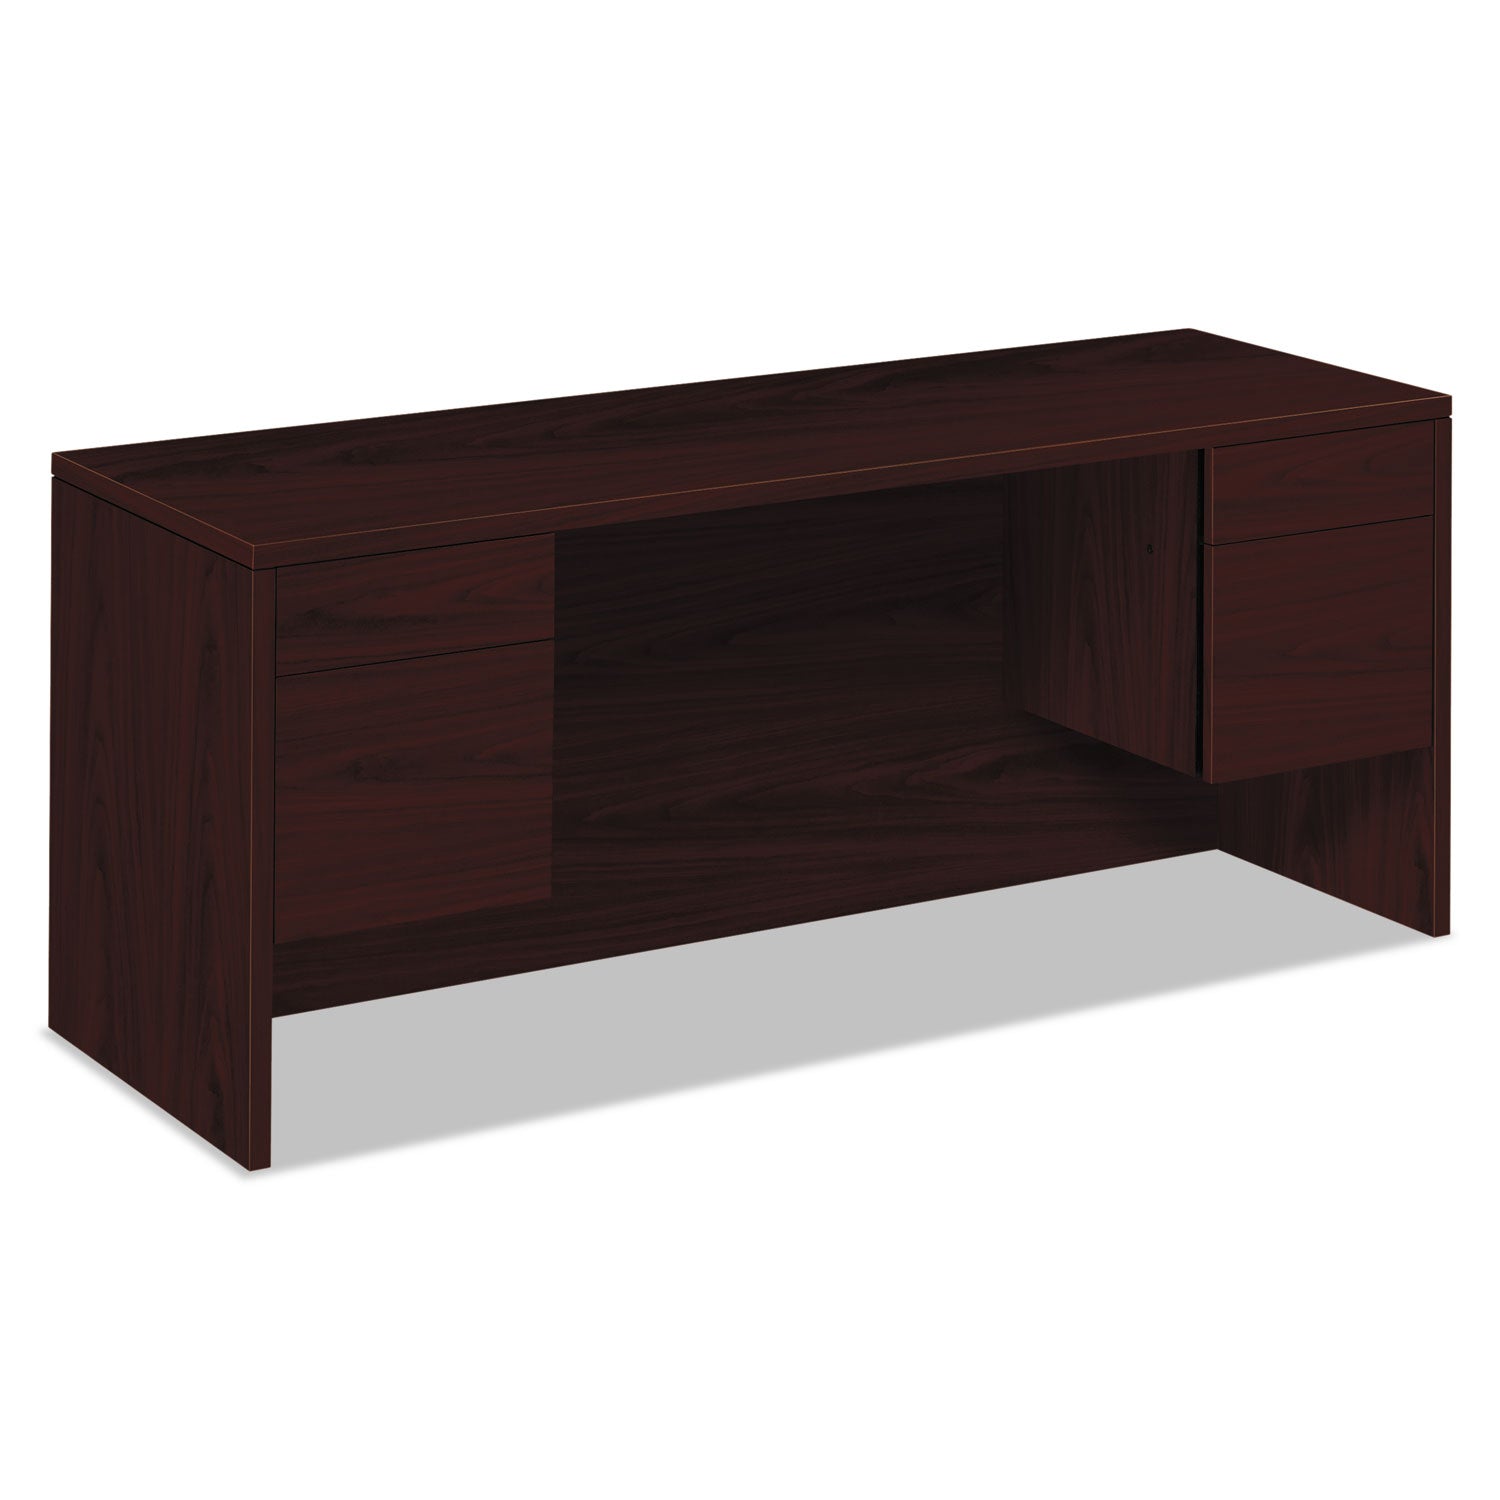 10500 Series Kneespace Credenza With 3/4-Height Pedestals, 72w x 24d x 29.5h, Mahogany - 